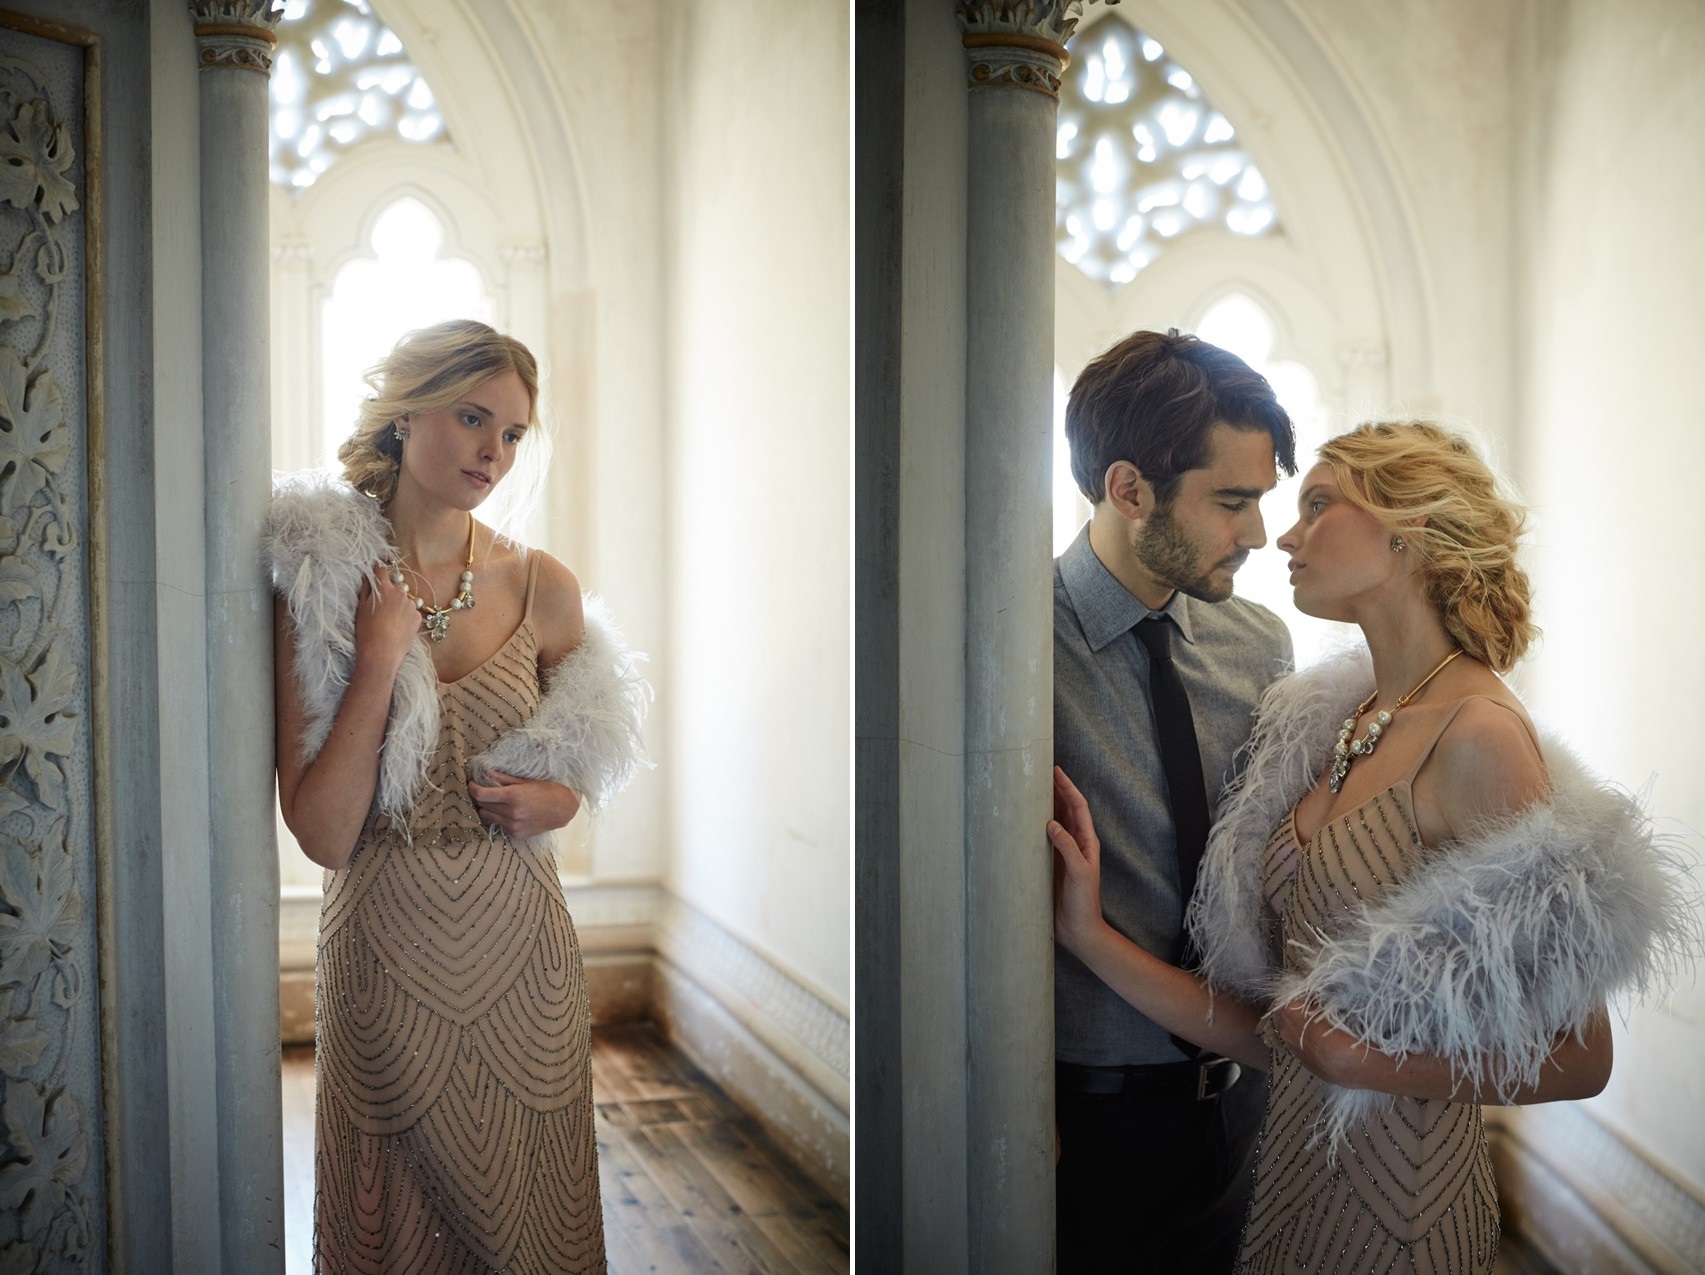 'Twice Enchanted' BHLDN's Dreamy New Collection for Fall 2015